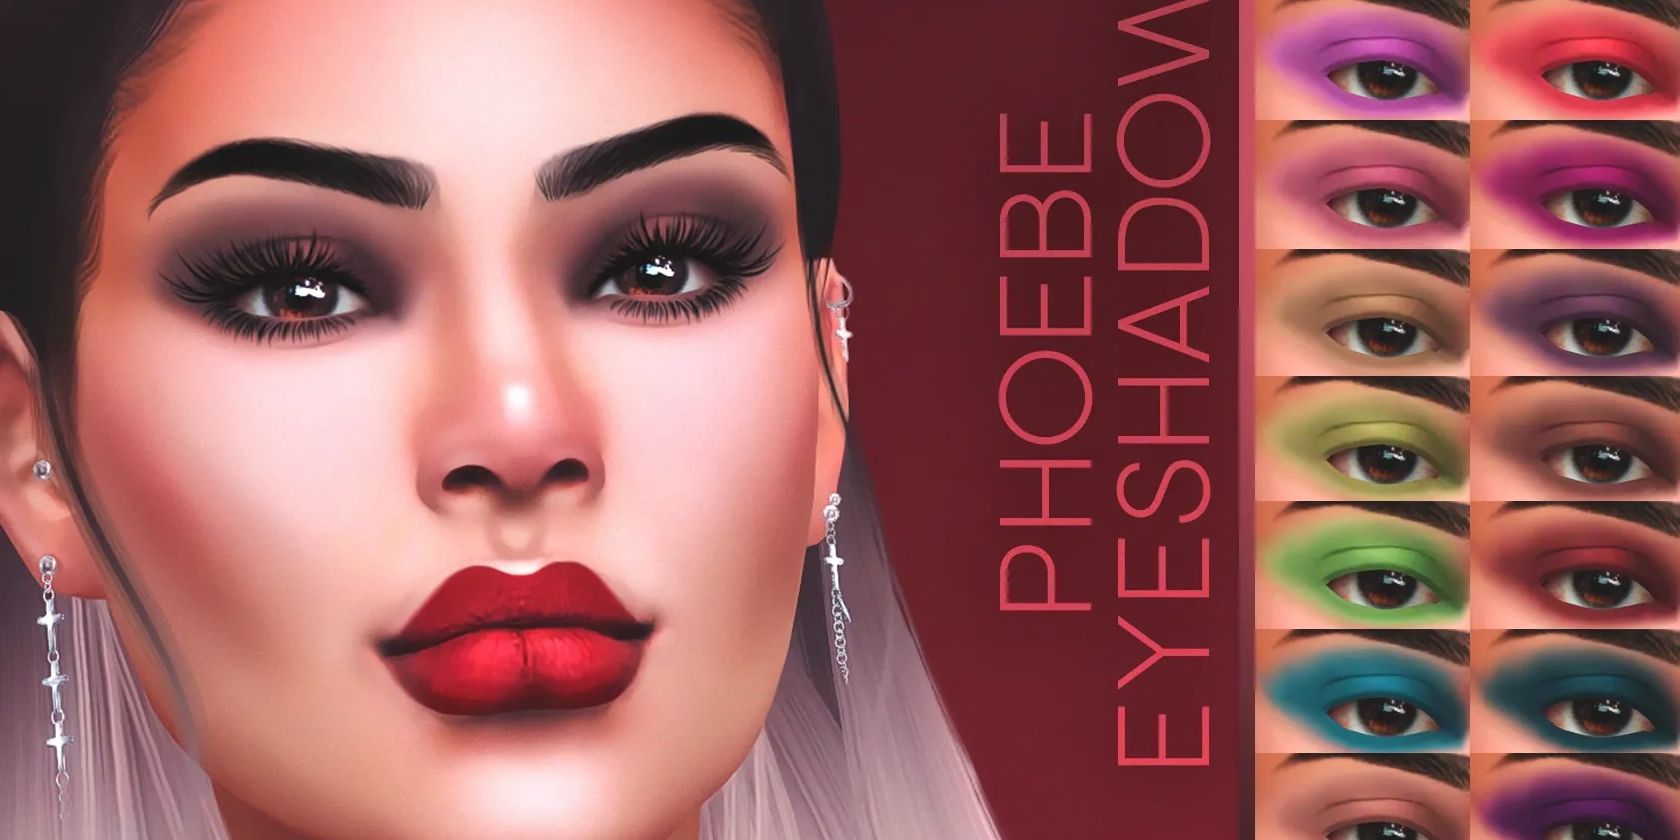 Sim with a custom eyeshadow next to a picture of eyes with different colored eyeshadows